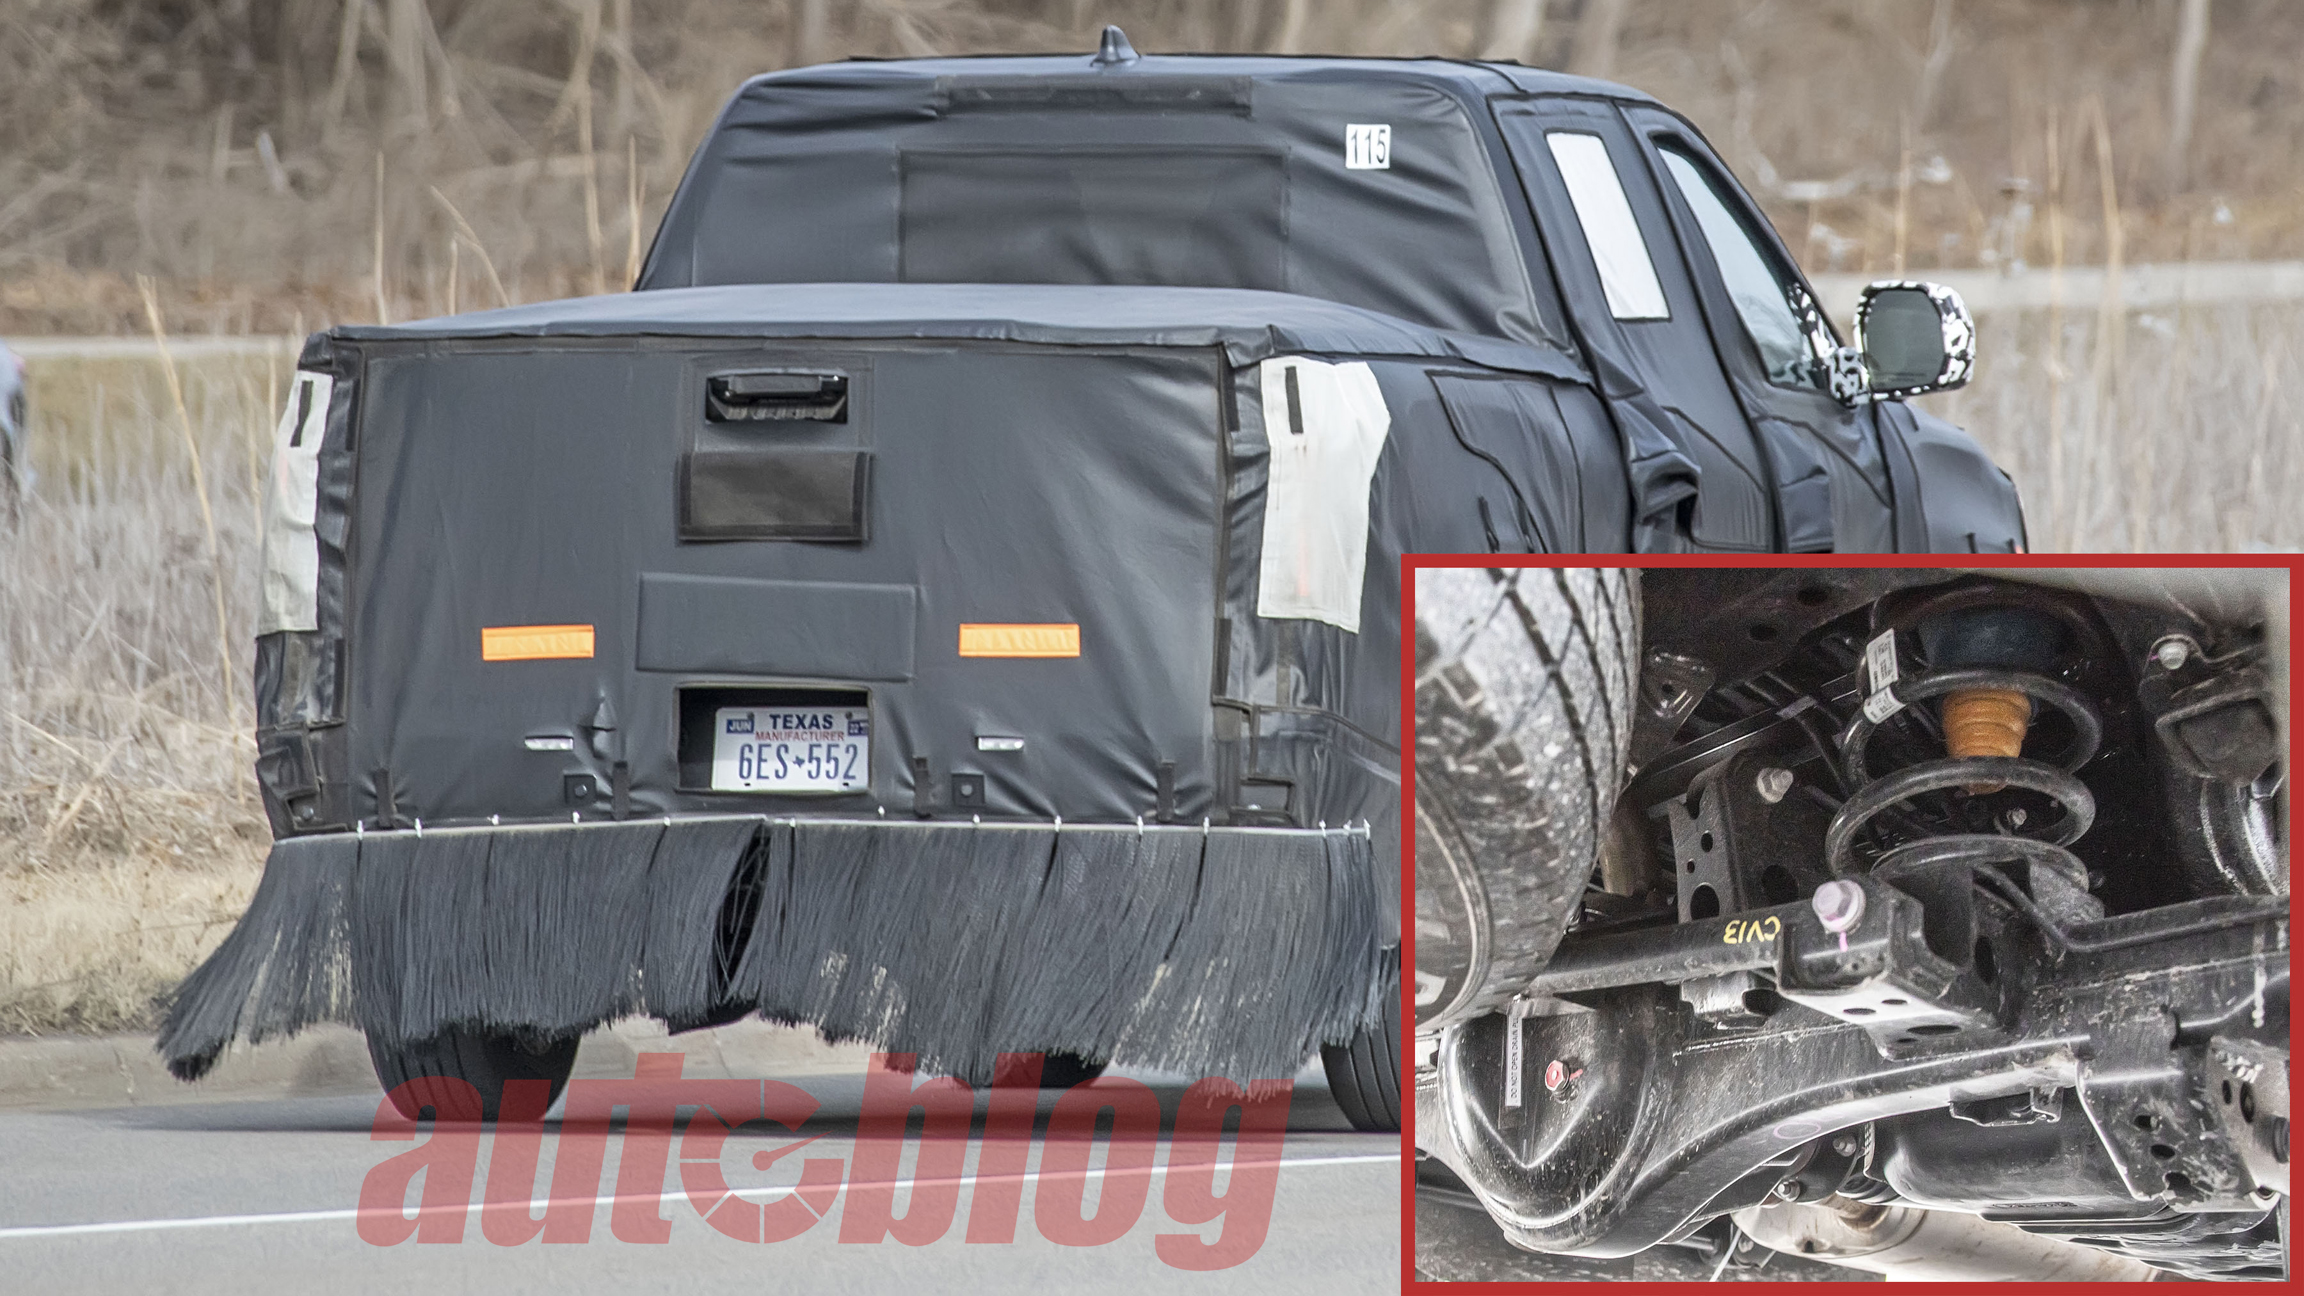 Next-generation Tundra caught testing with coil springs in new spy